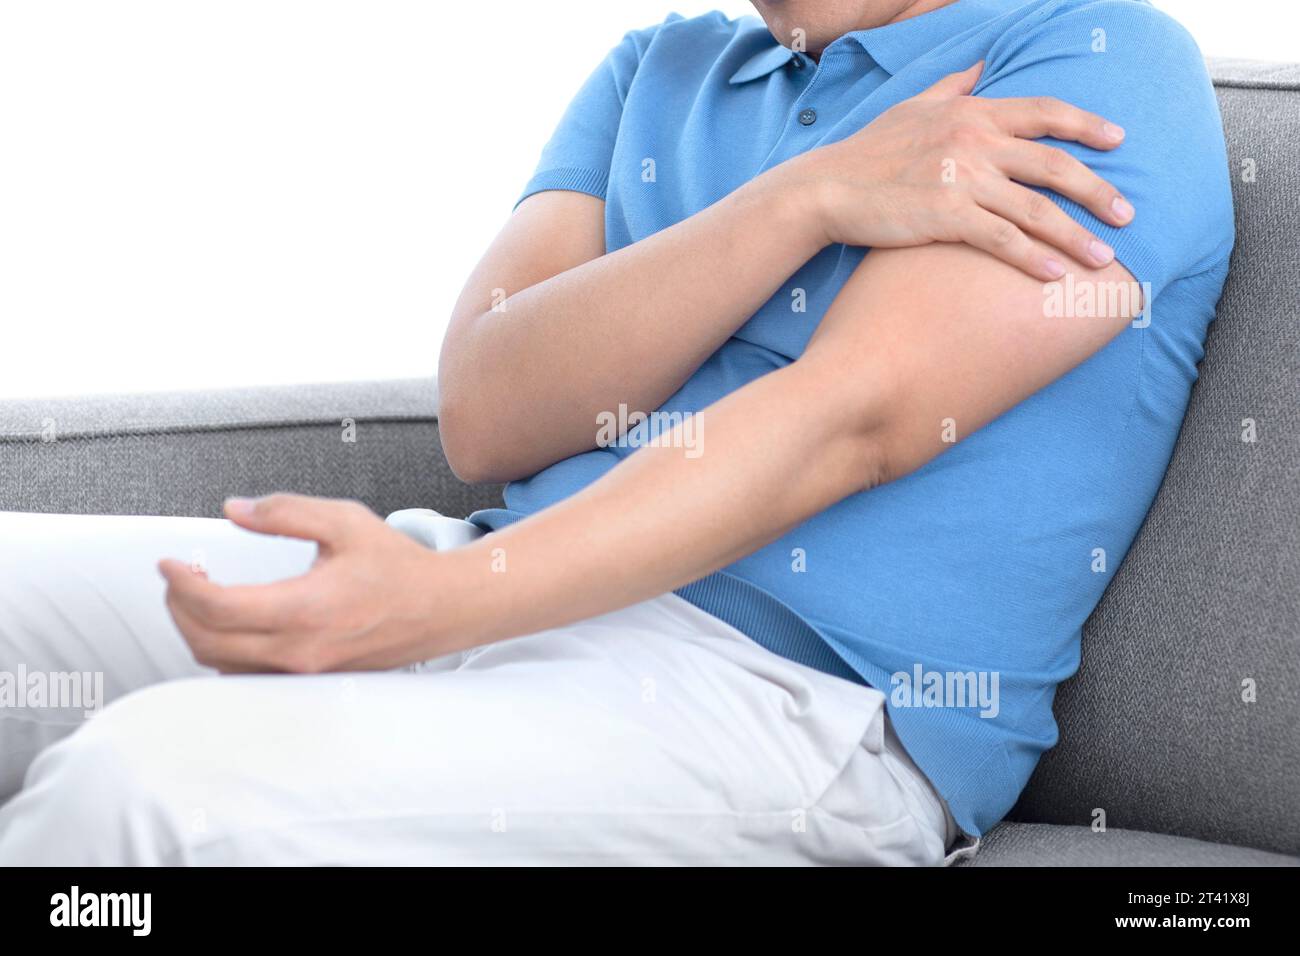 Man with arm pain Stock Photo